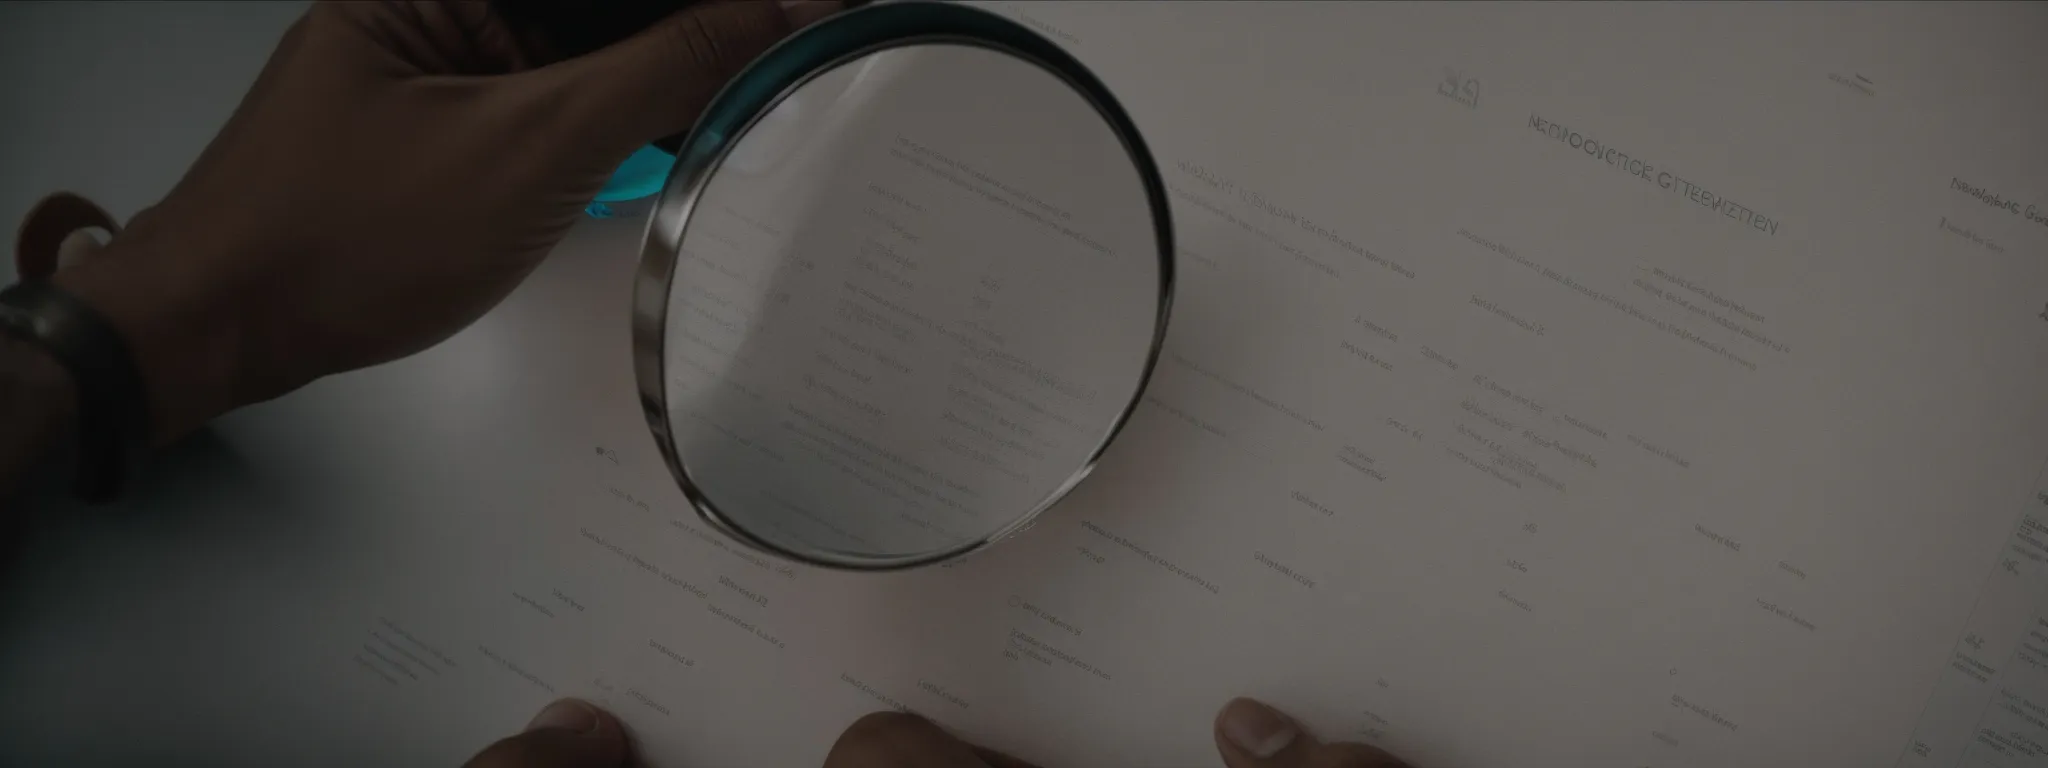 a person intensely examining a magnifying glass over a document titled 